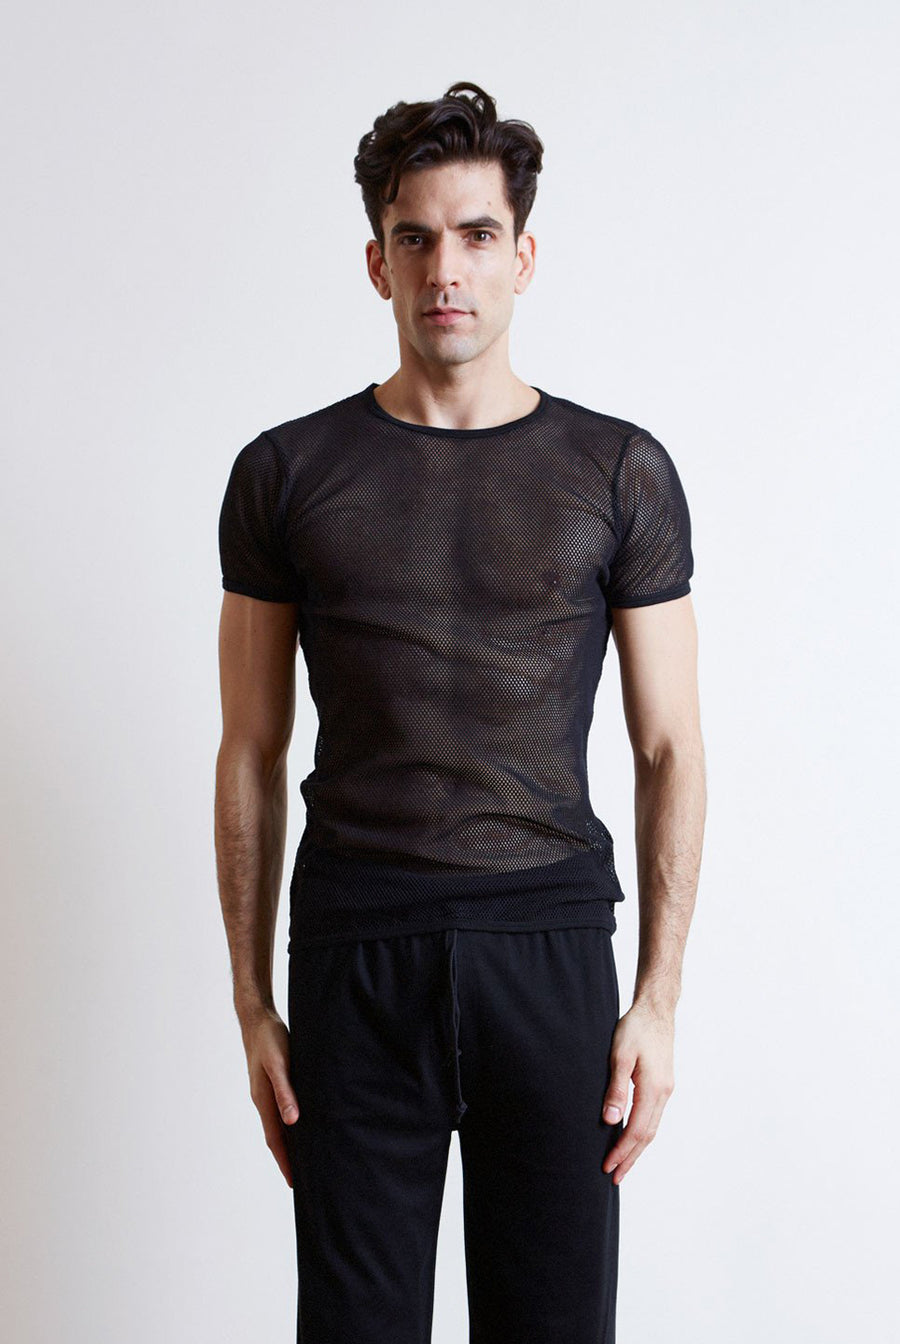 Men's black mesh t-shirt in collaboration with Fantastic Man